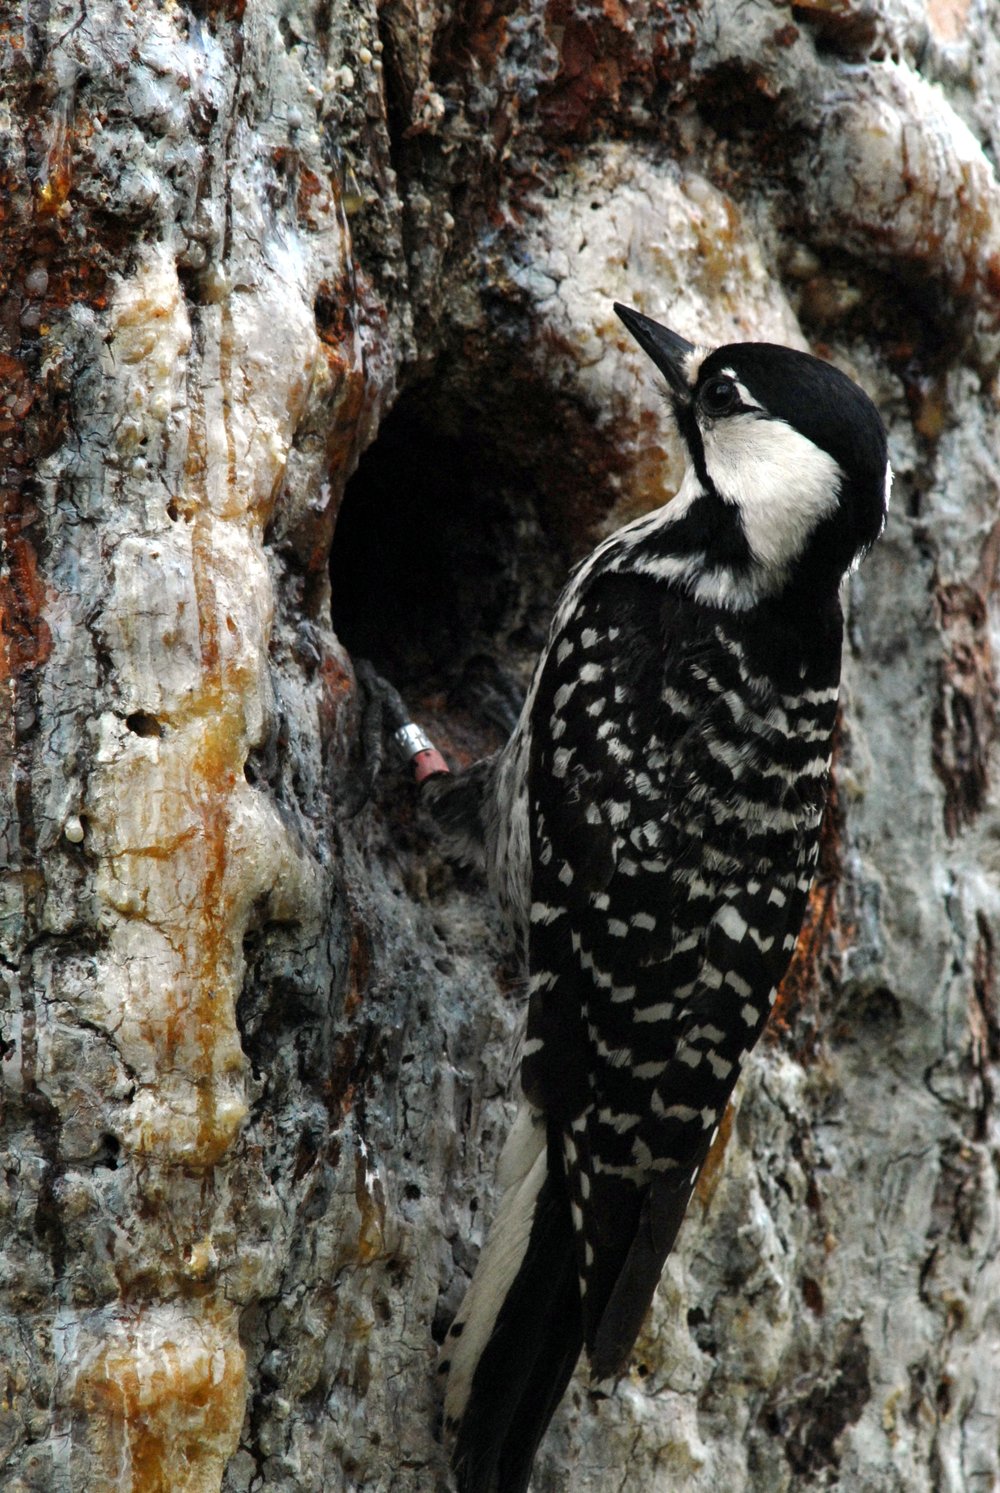 This endangered red-cockaded woodpecker is feeding young at the nest, in a cavity of a longleaf pine in Georgia. Active management and restoration of longleaf forests can help recover this species.(John Maxwell for U.S. Fish and Wildlife Service (CC BY 2.0))